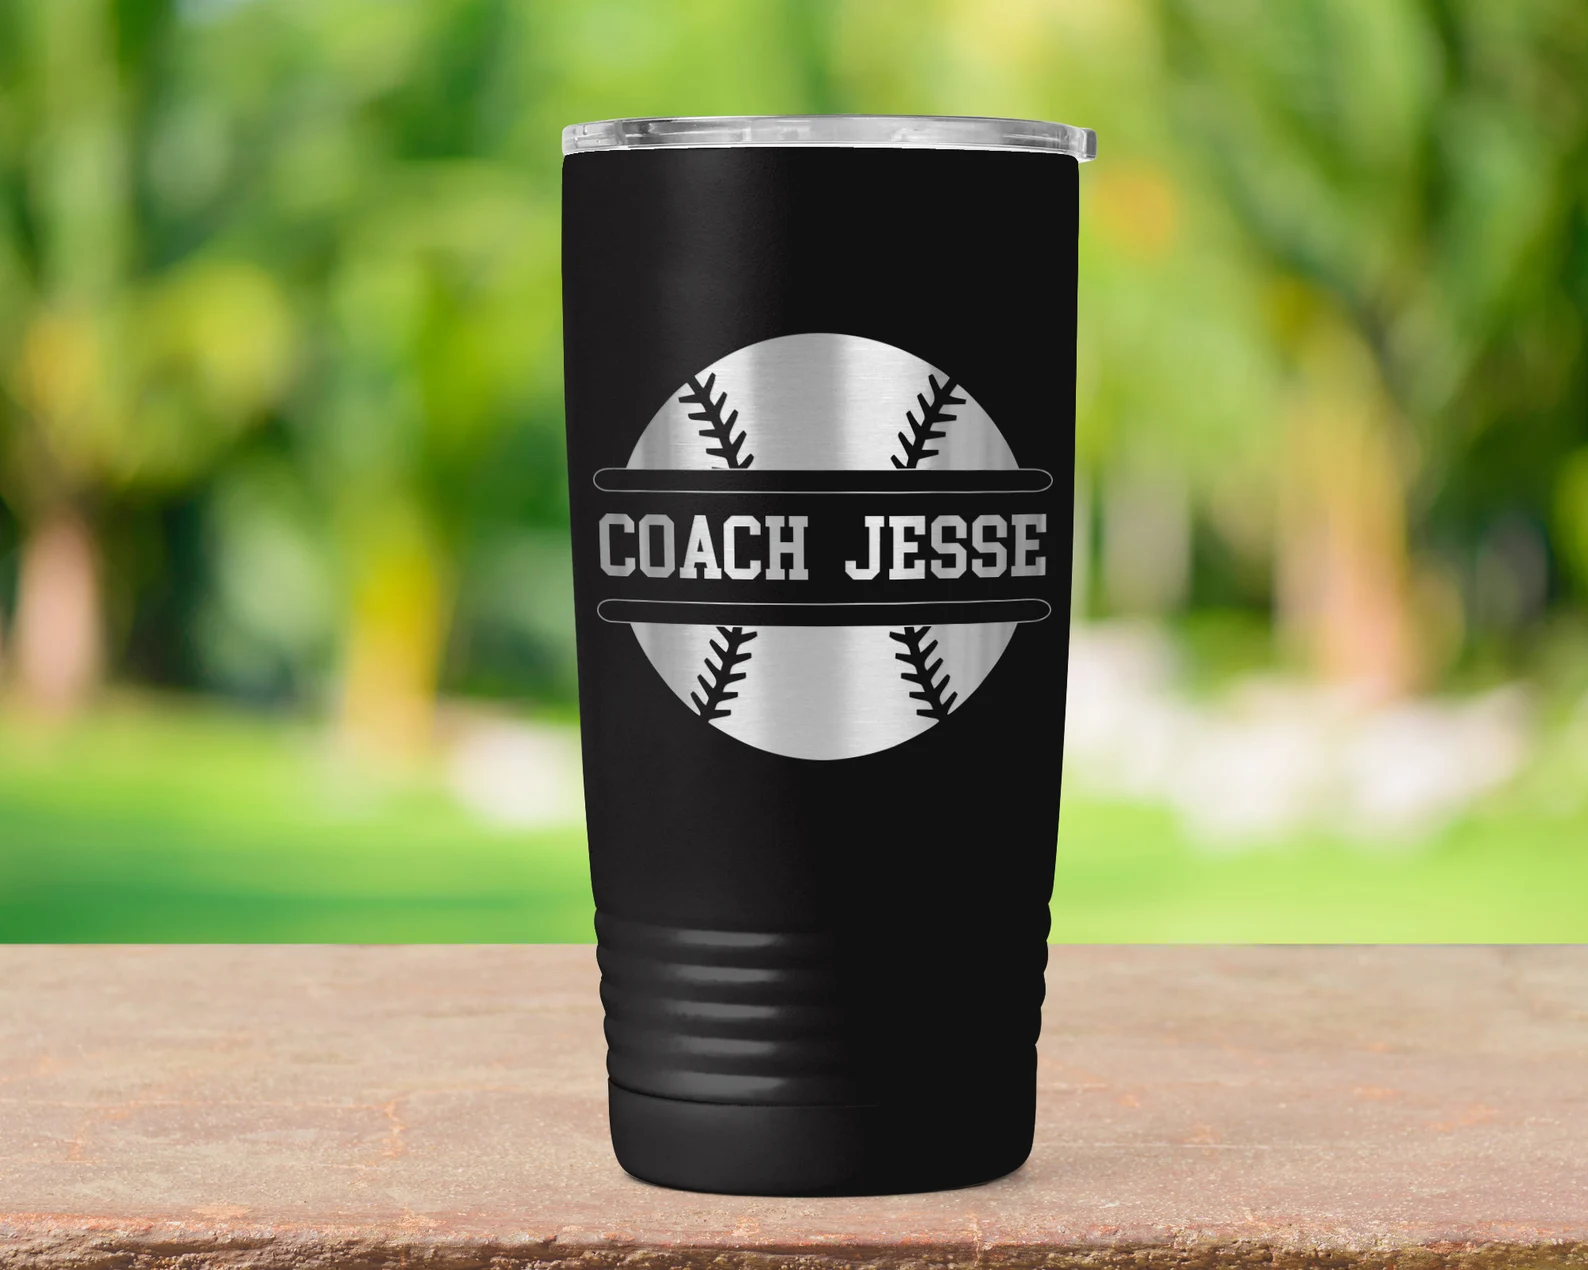 We love the baseball coach gift ideas available online!